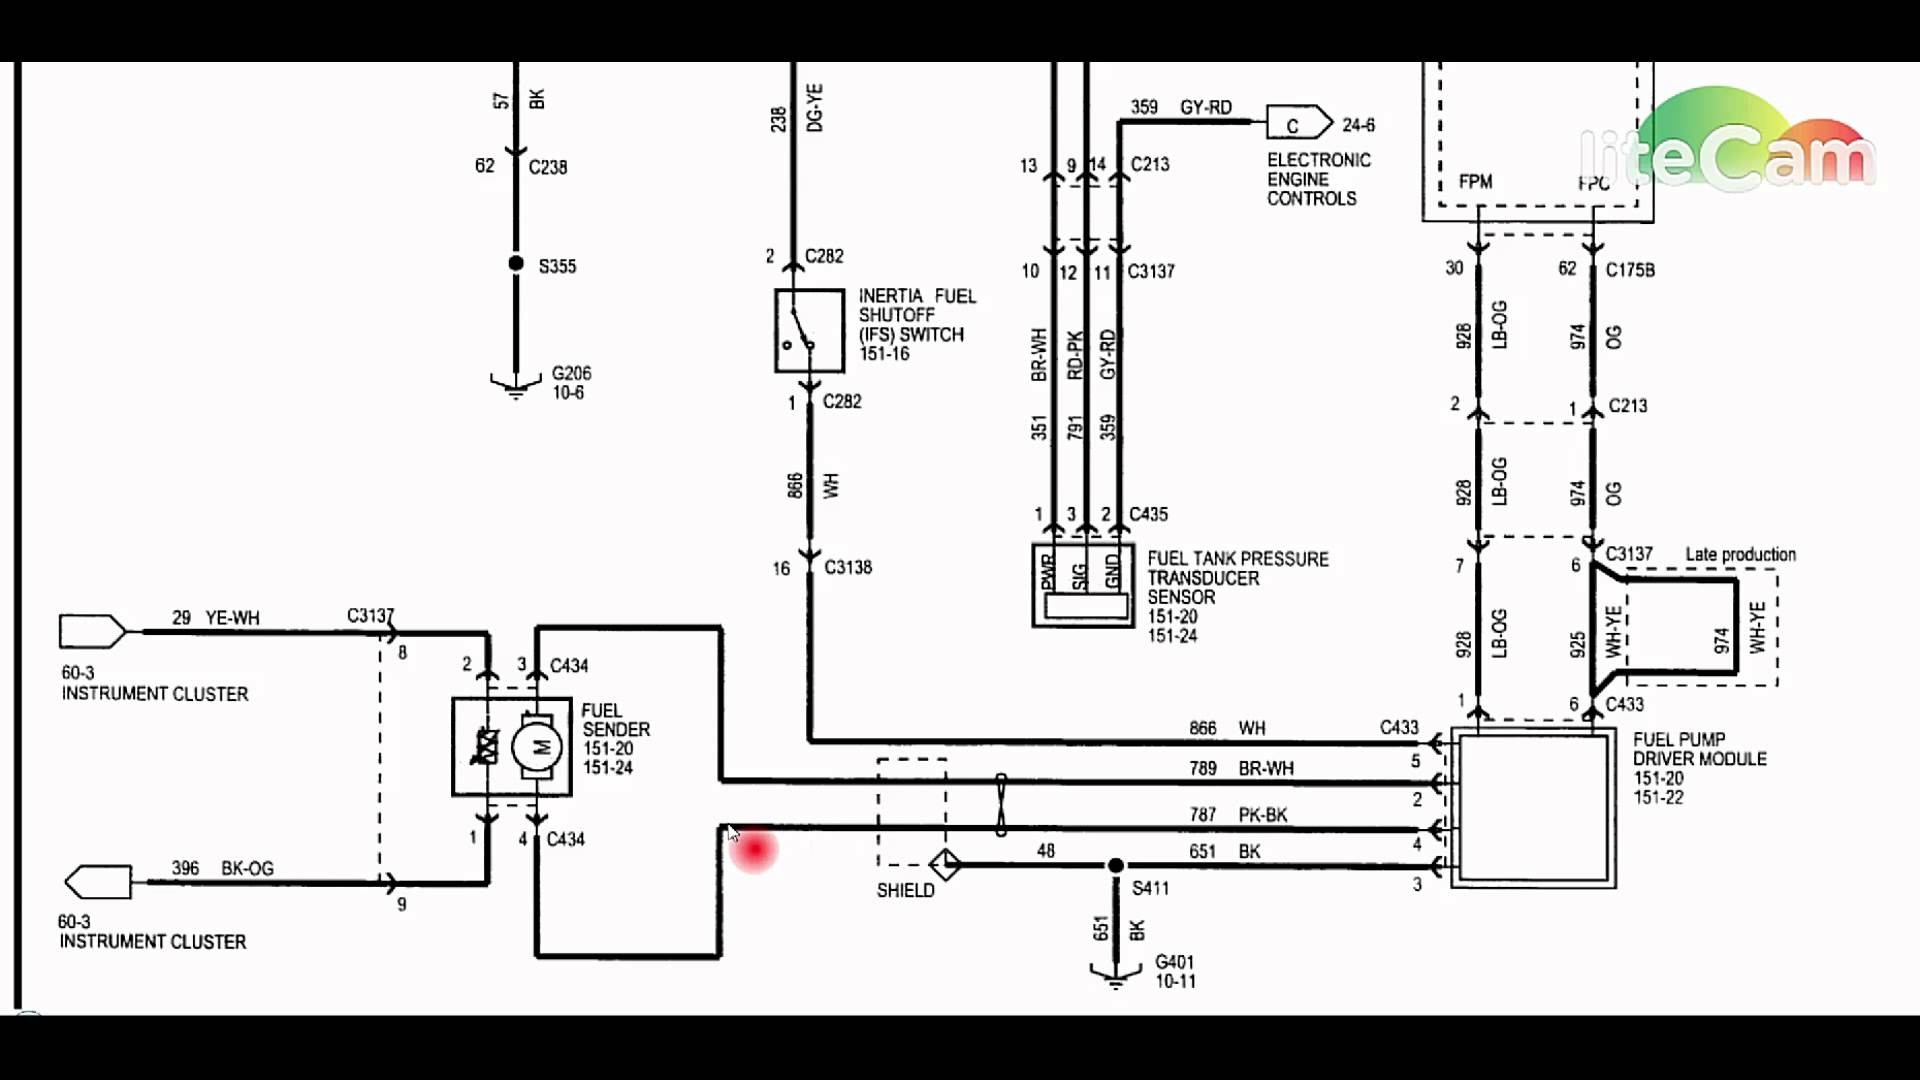 Wiring Diagram for An Electric Fuel Pump and Relay Panel Diagram 1997 ford 1988 ford F150 Fuel Pump Wiring Diagram More Of Wiring Diagram for An Electric Fuel Pump and Relay